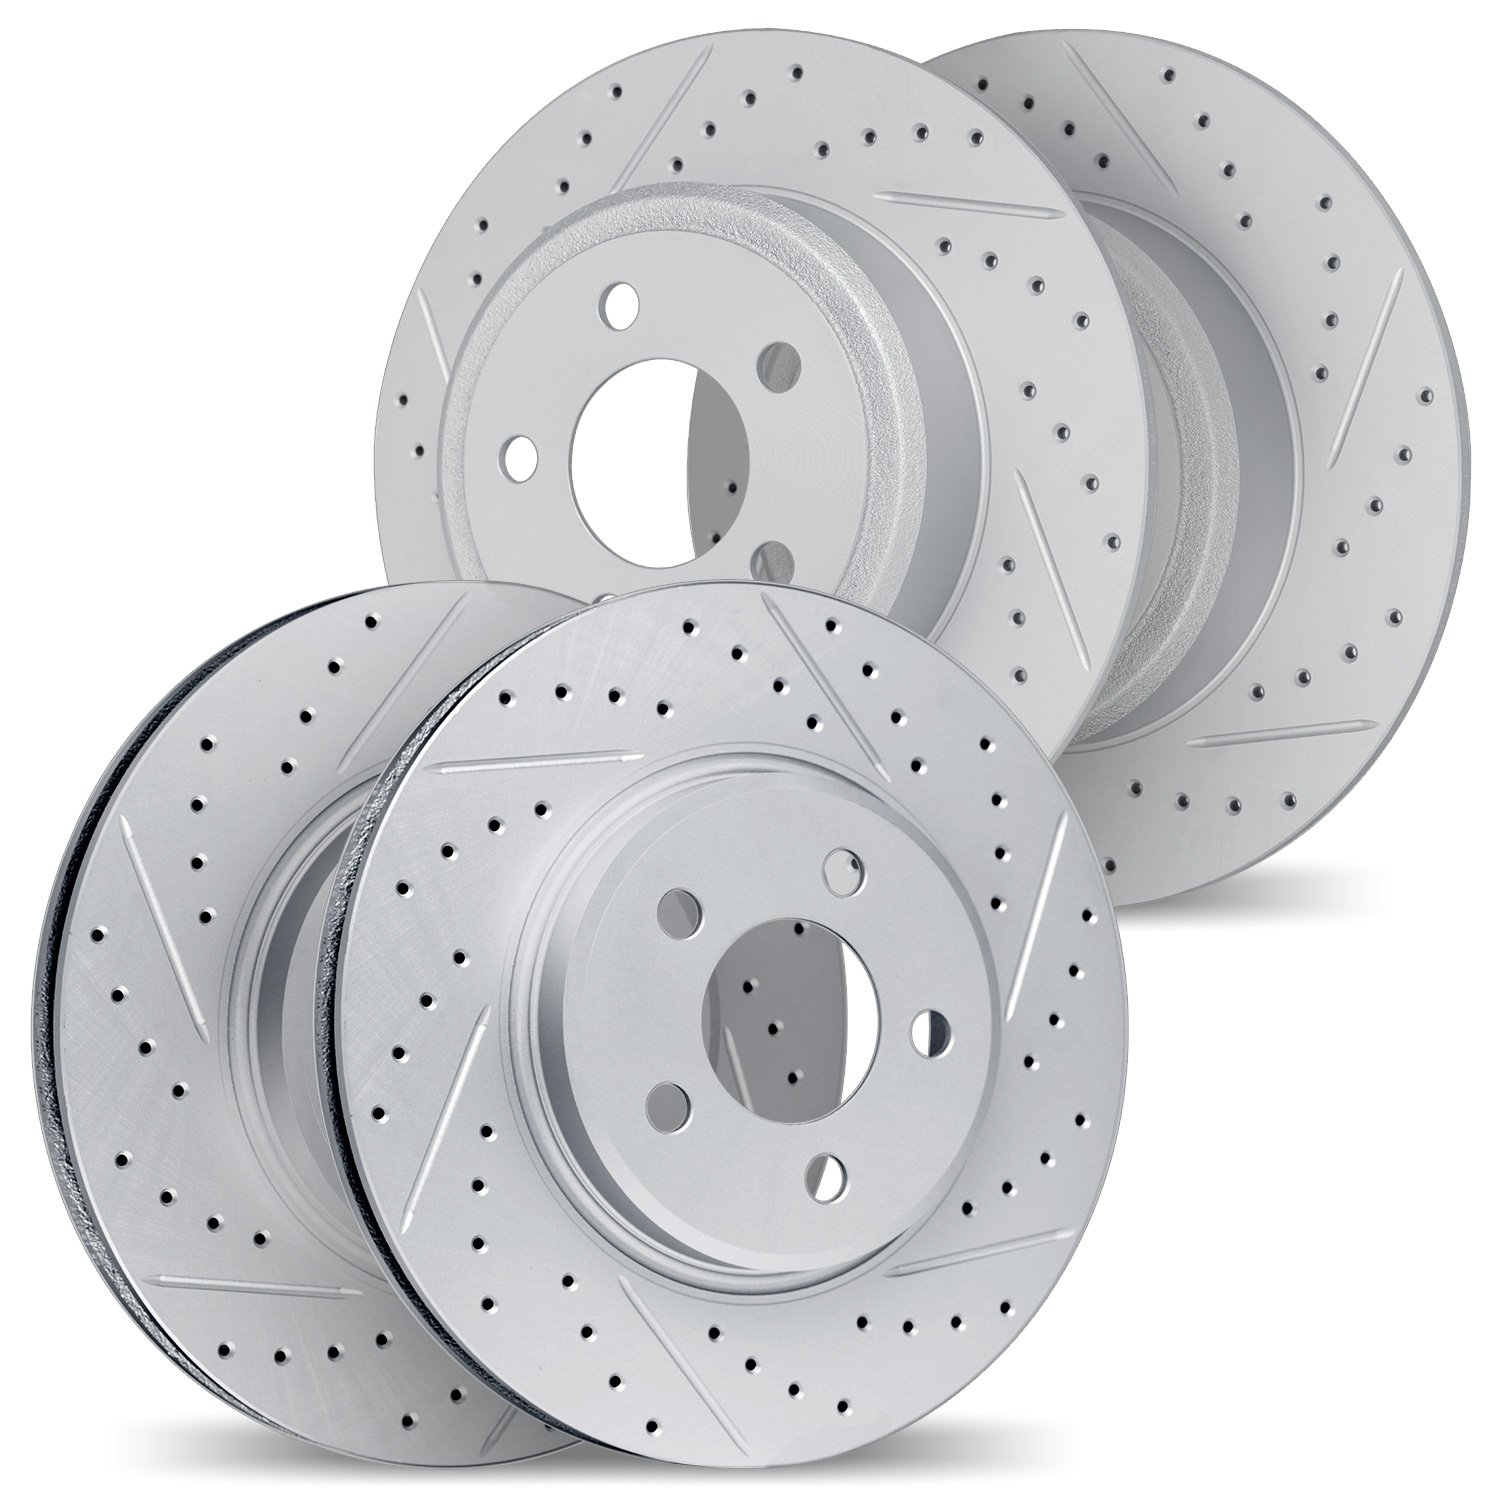 2004-58013 Geoperformance Drilled/Slotted Brake Rotors, 2004-2008 Acura/Honda, Position: Front and Rear